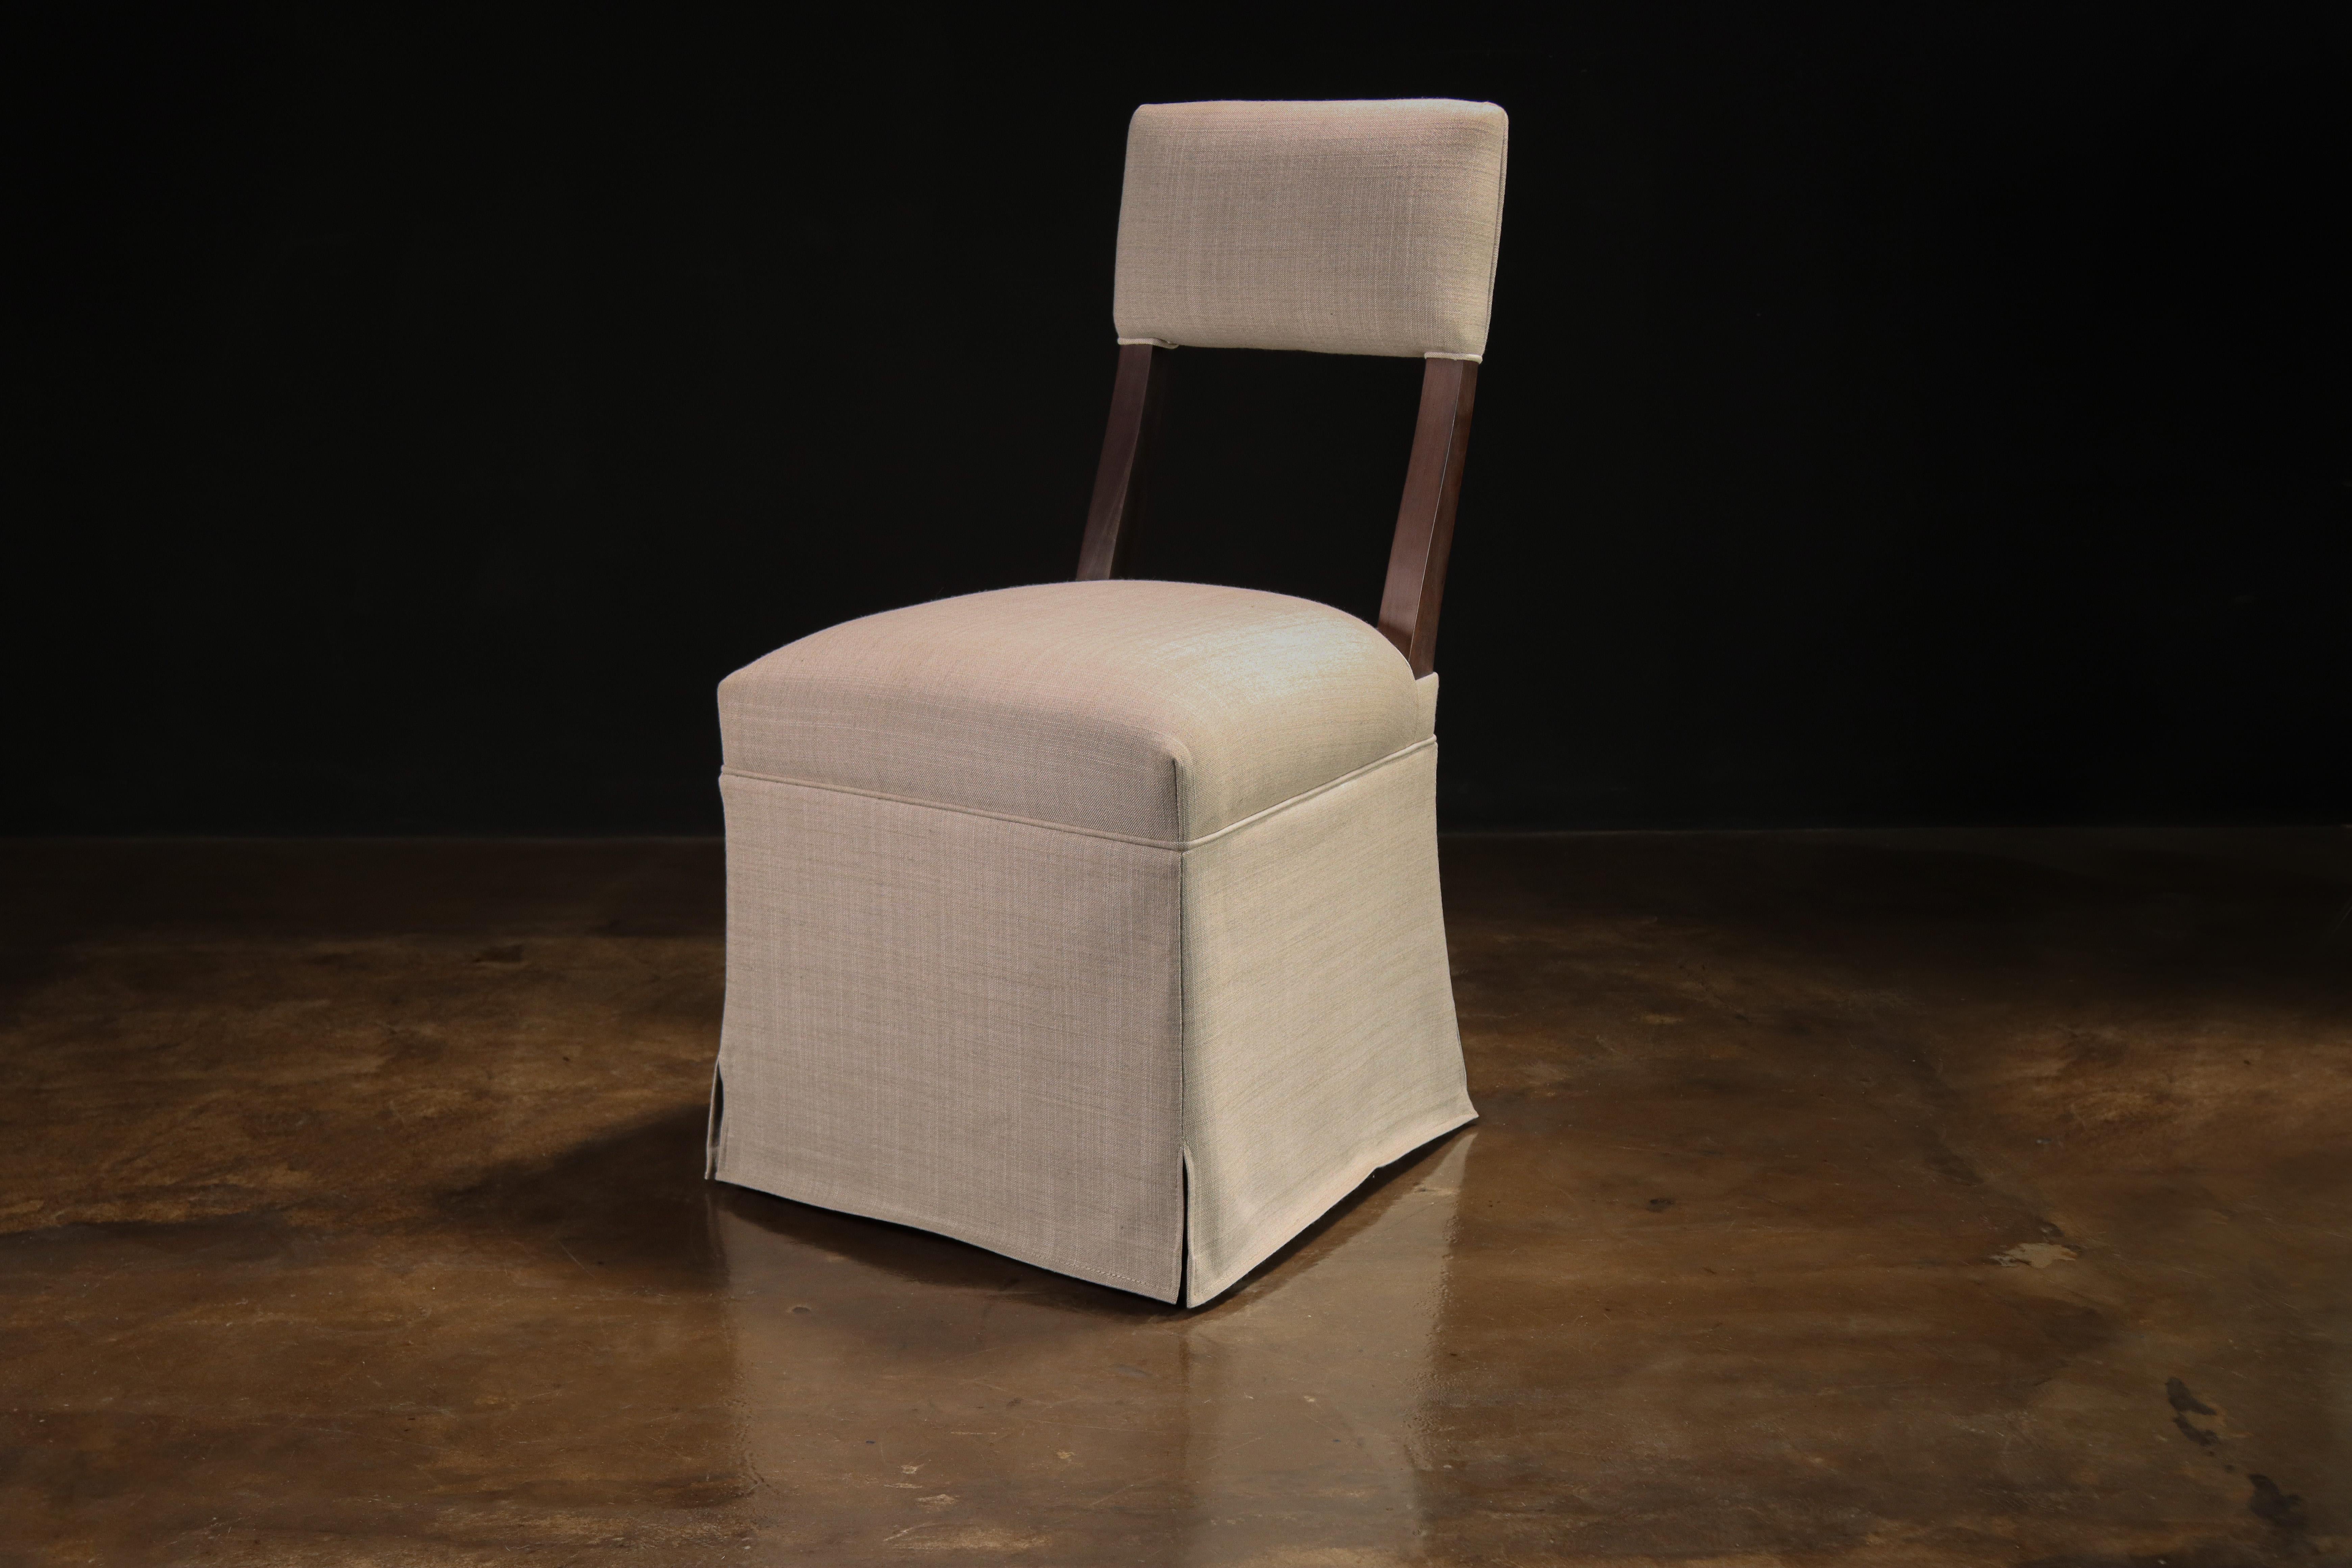 The luca chair’s gently curved, high back exudes elegance and has become one of Costantini's most specified pieces. Usually available for quick-ship in the upholstery material of your choice.

Measurements are 19